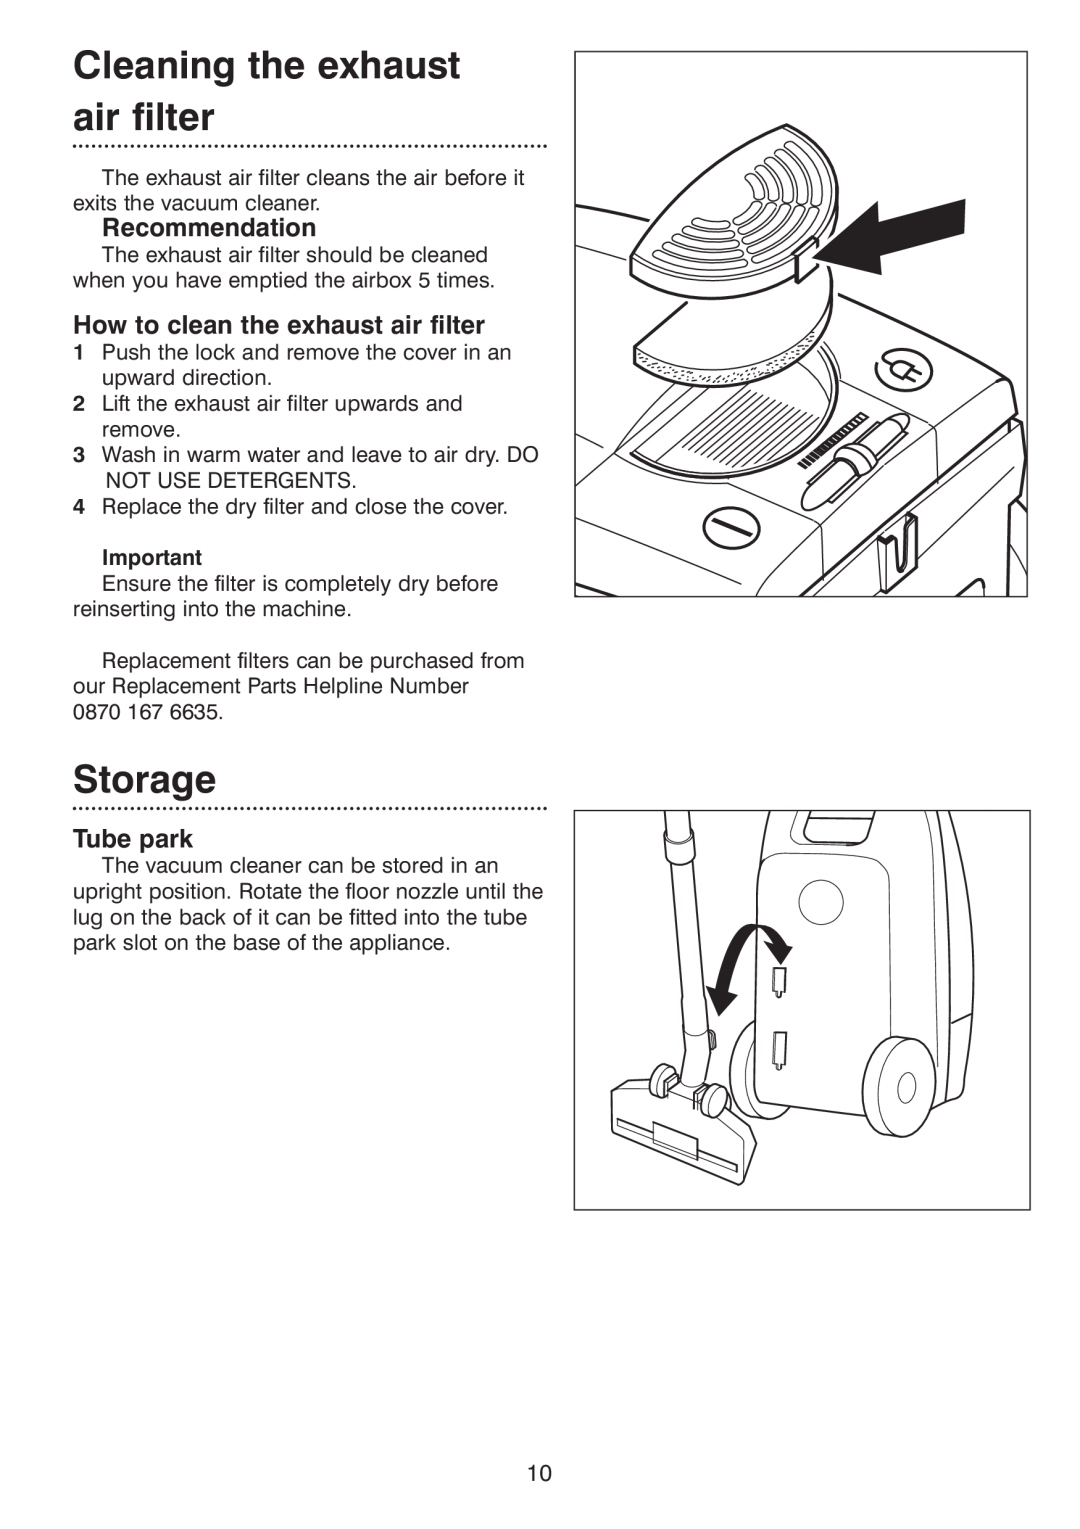 Morphy Richards Vacuum Cleaner manual Cleaning the exhaust air filter, Storage, Recommendation, Tube park 